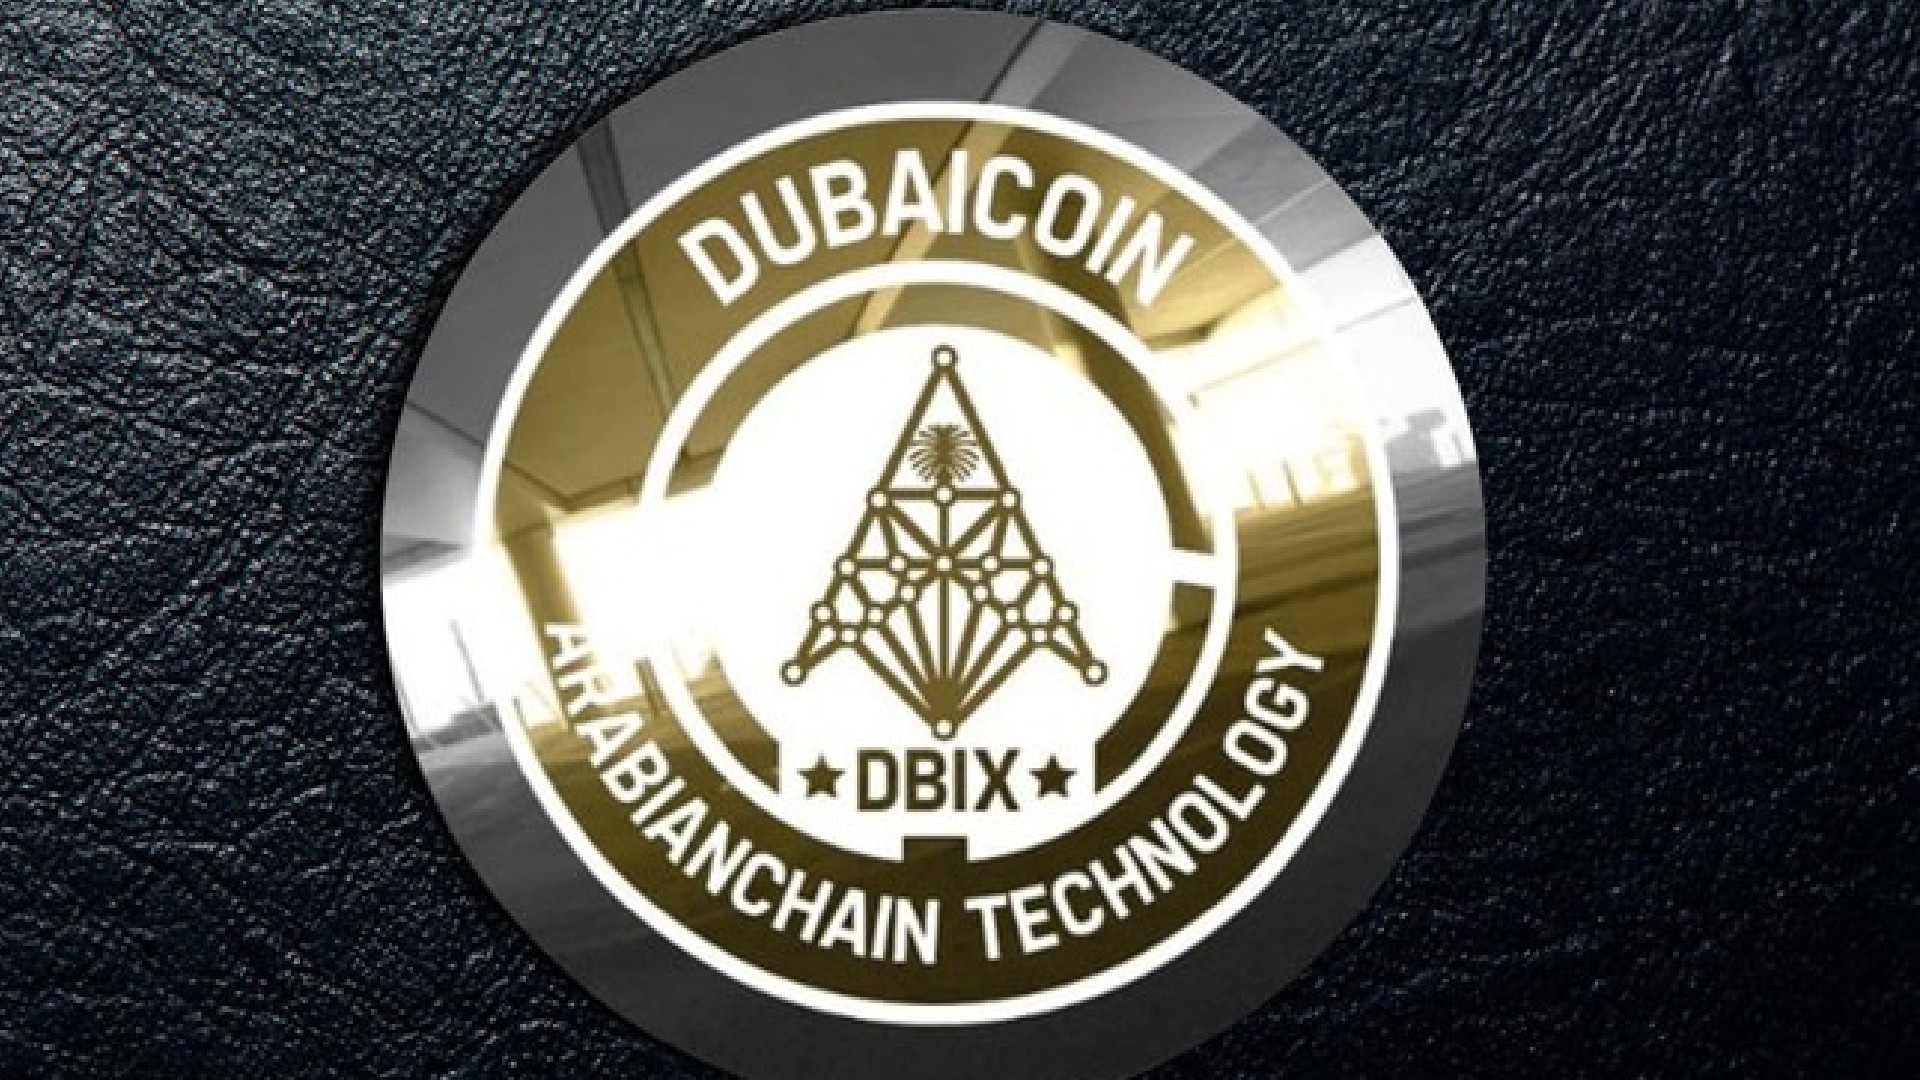 Is Dubai going Launch Its Own Crypto Dubicoin(DBIX)? Or Is It A Fake News?